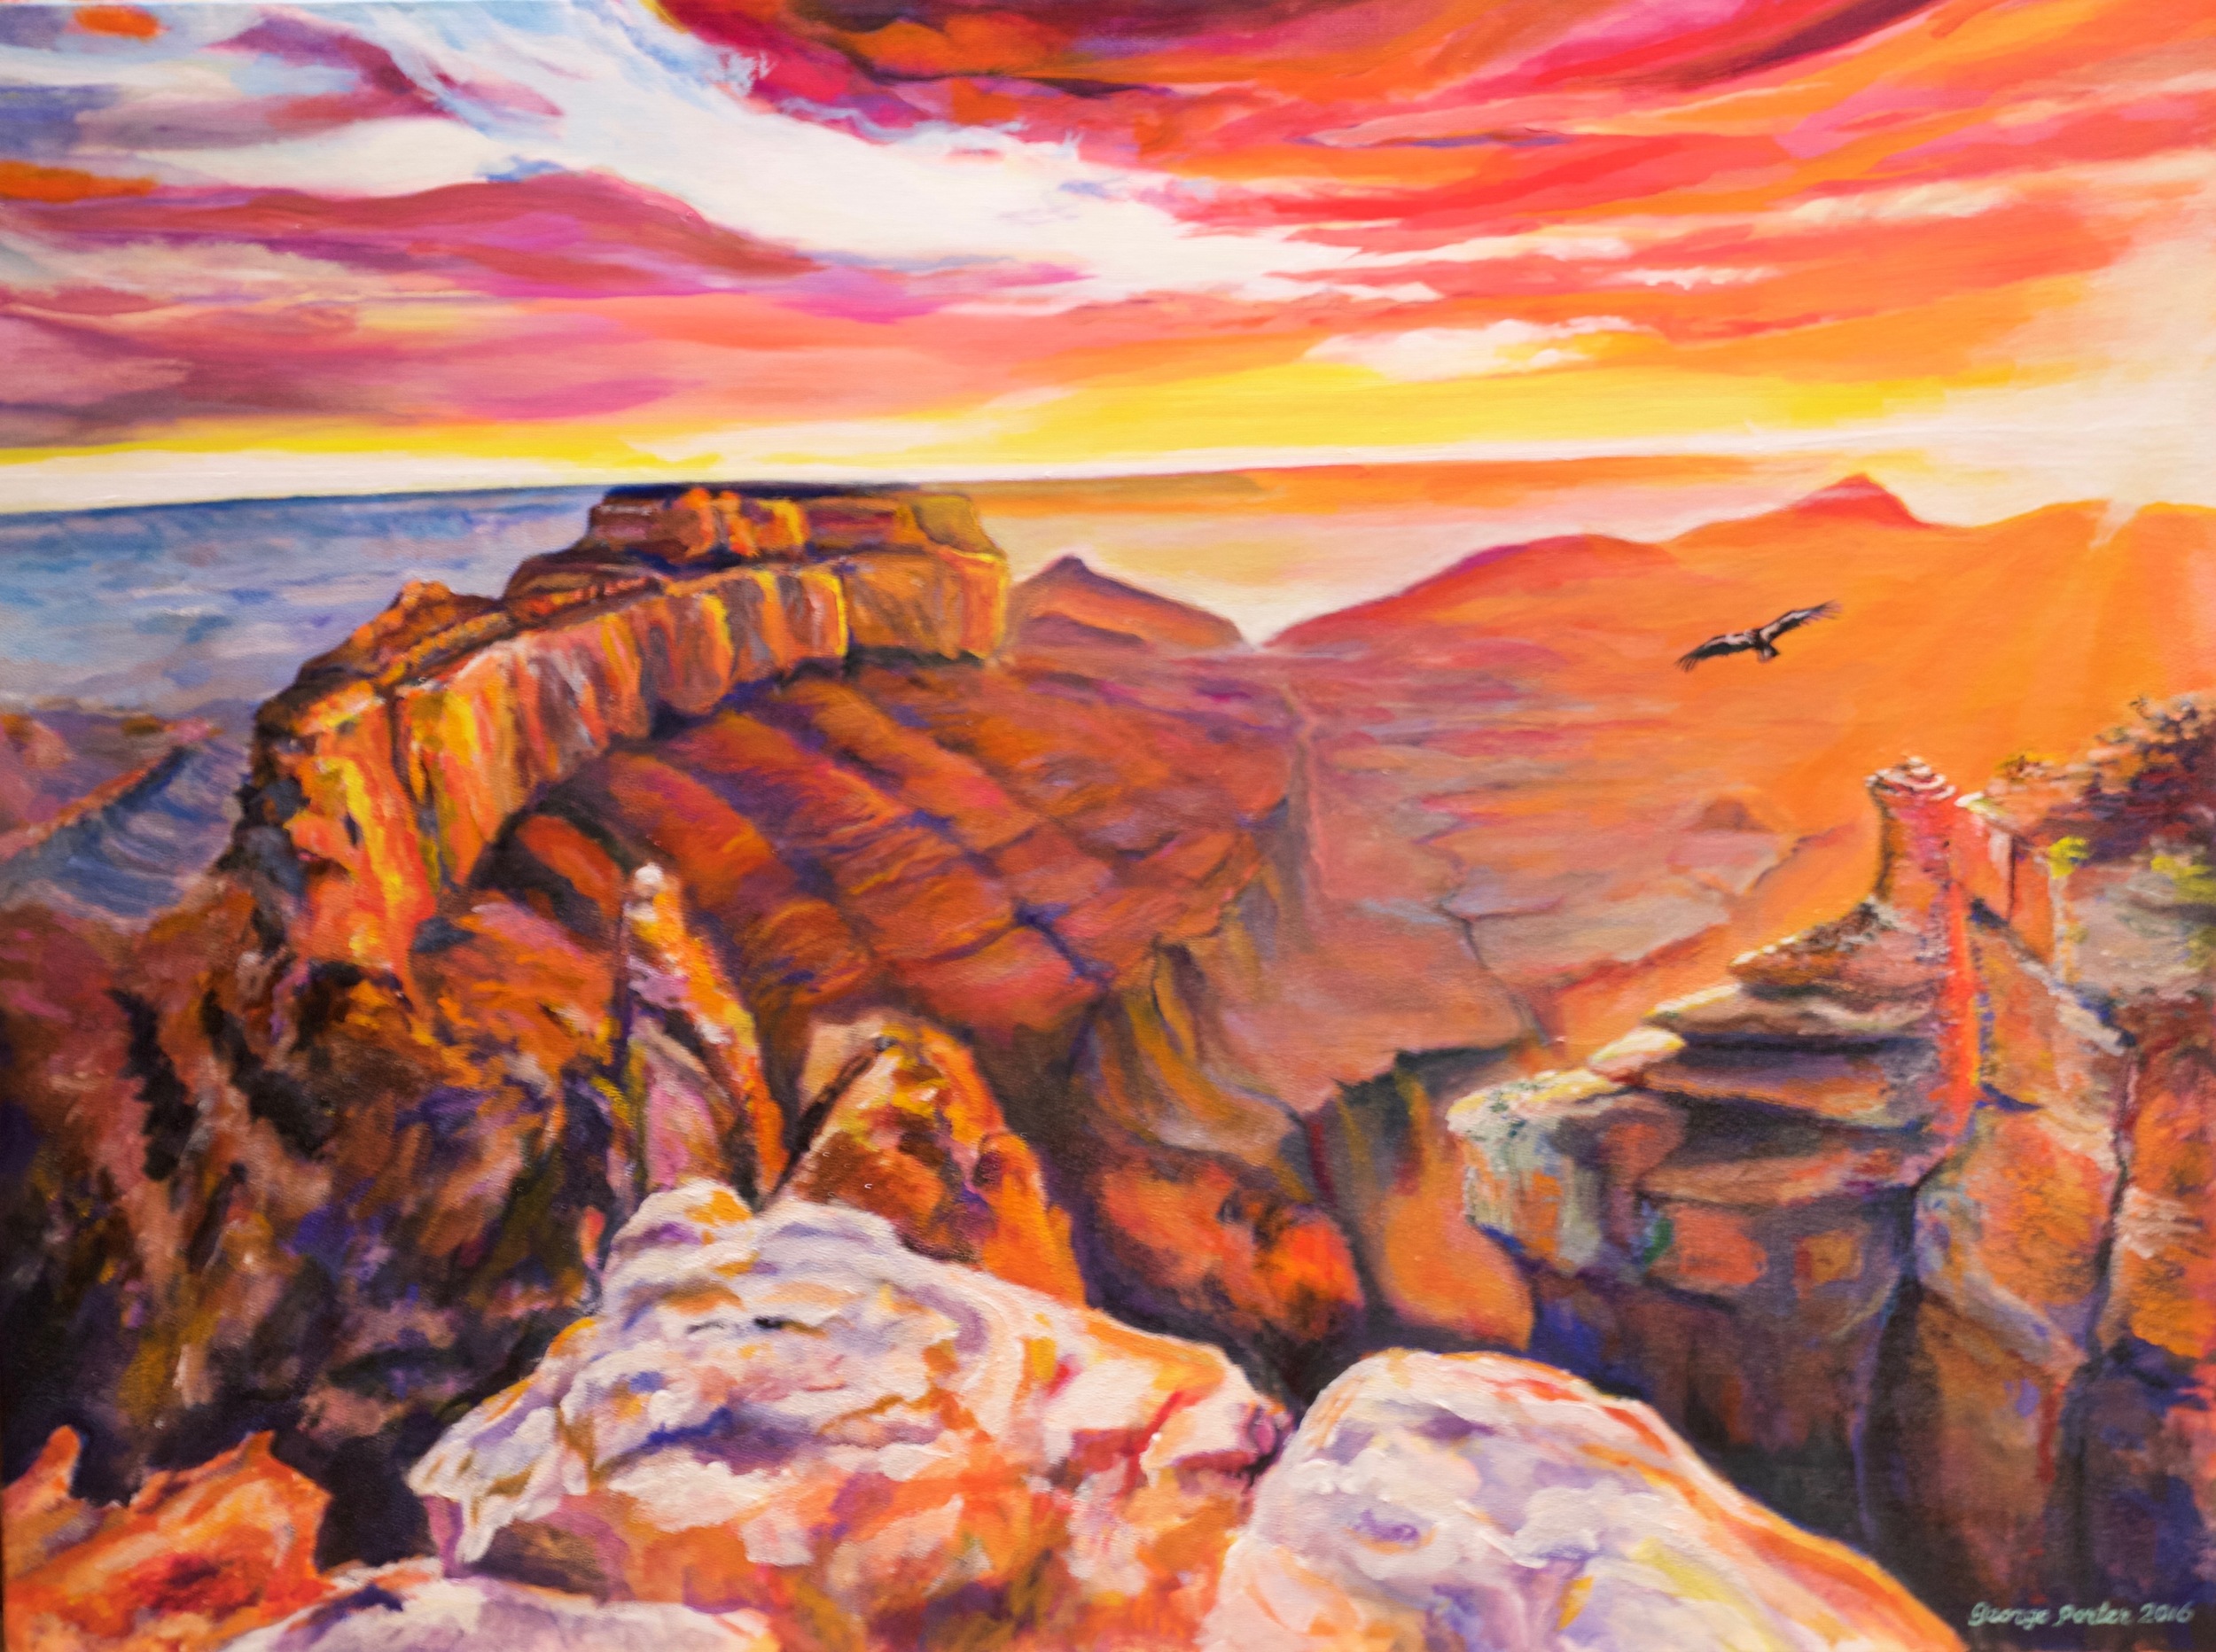 Canyon Lights, acrylic on canvas by George Porter